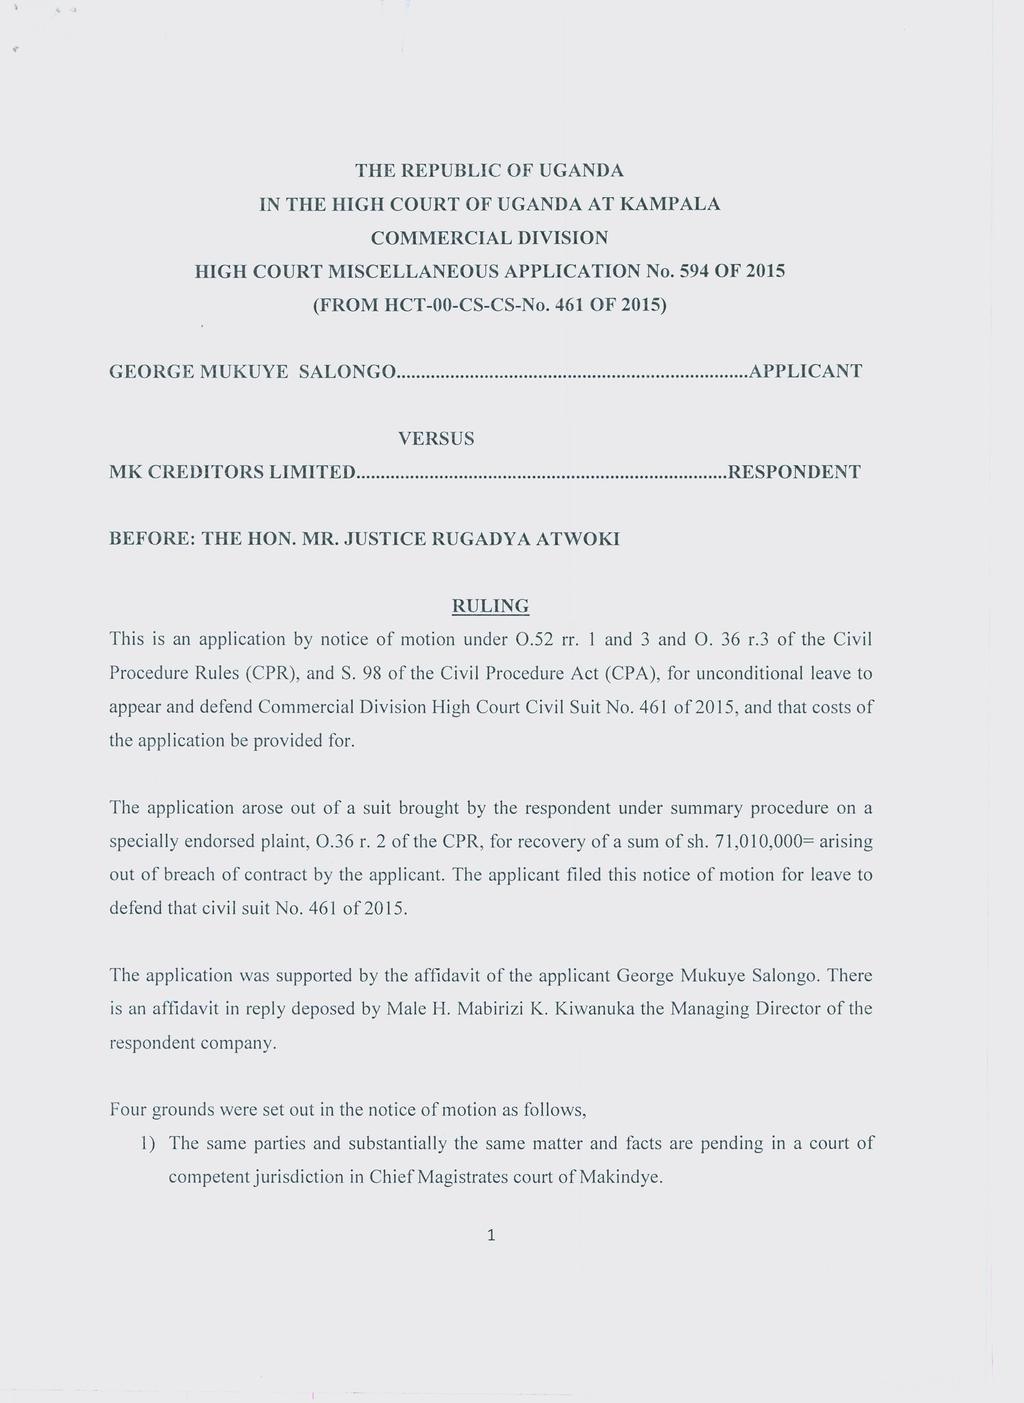 .- THE REPUBLIC OF UGANDA IN THE HIGH COURT OF UGANDA AT KAMPALA COMMERCIAL DIVISION HIGH COURT MISCELLANEOUS APPLICATION No. 594 OF 2015 (FROM HCT -OO-CS-CS-No.